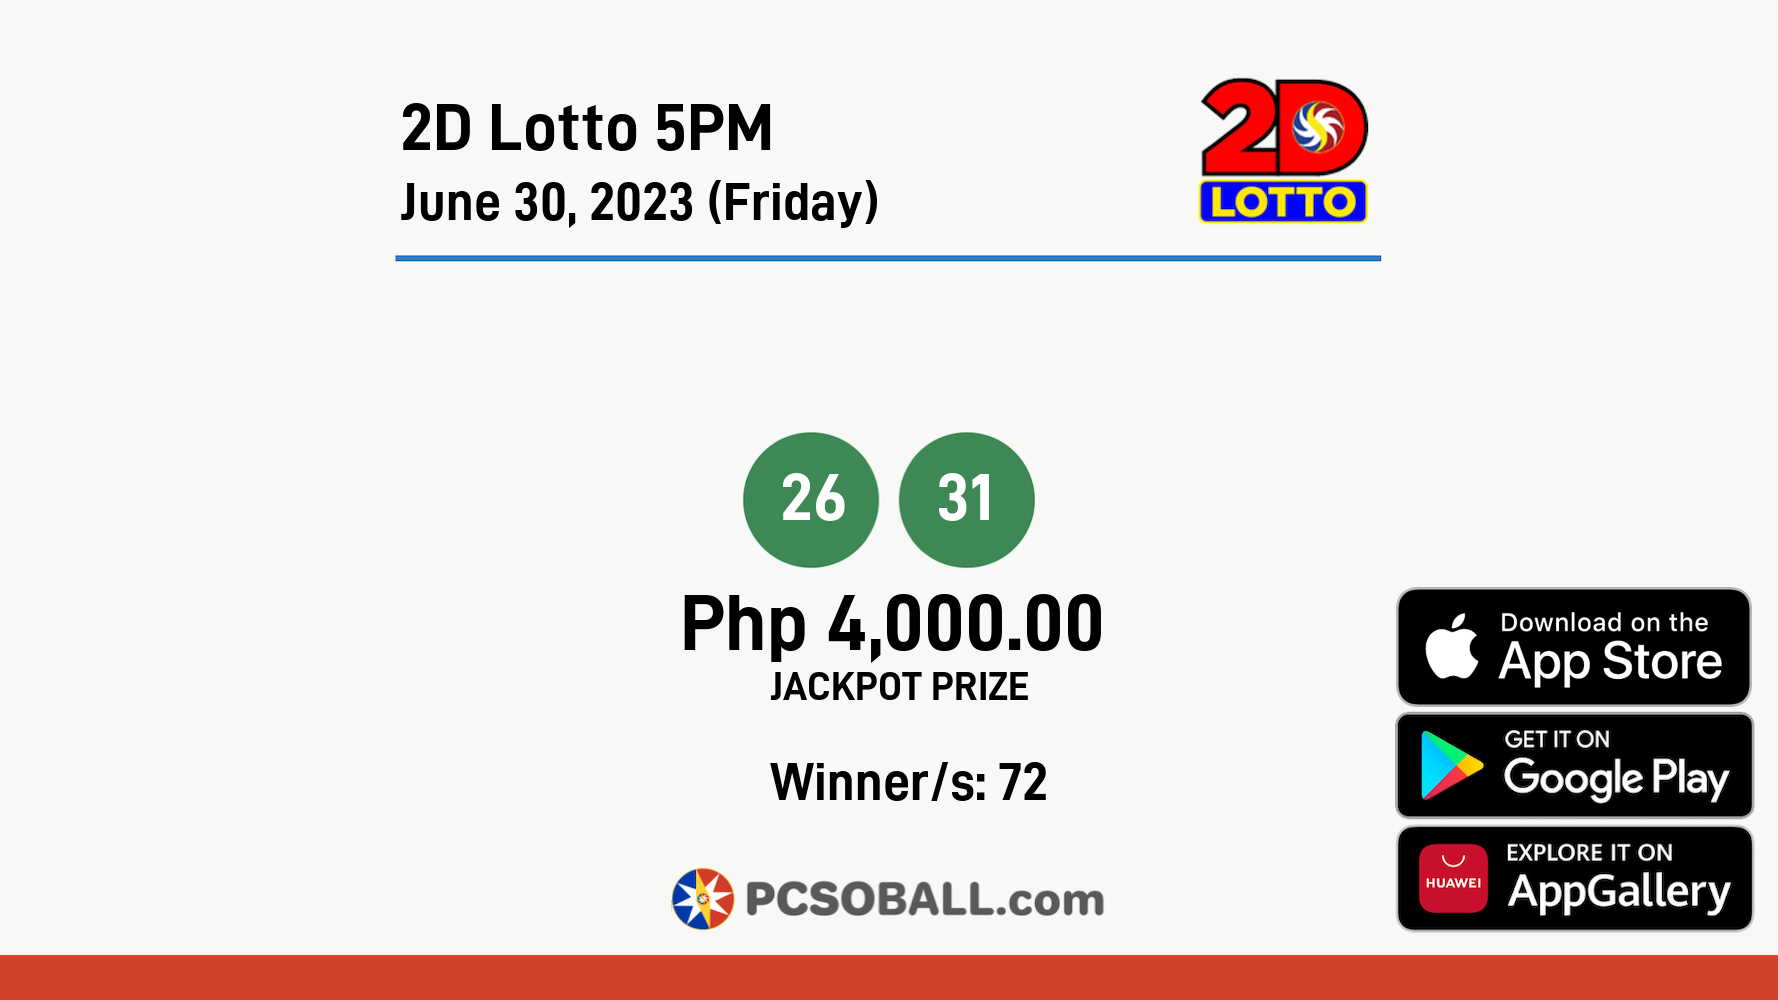 2D Lotto 5PM June 30, 2023 (Friday) Result